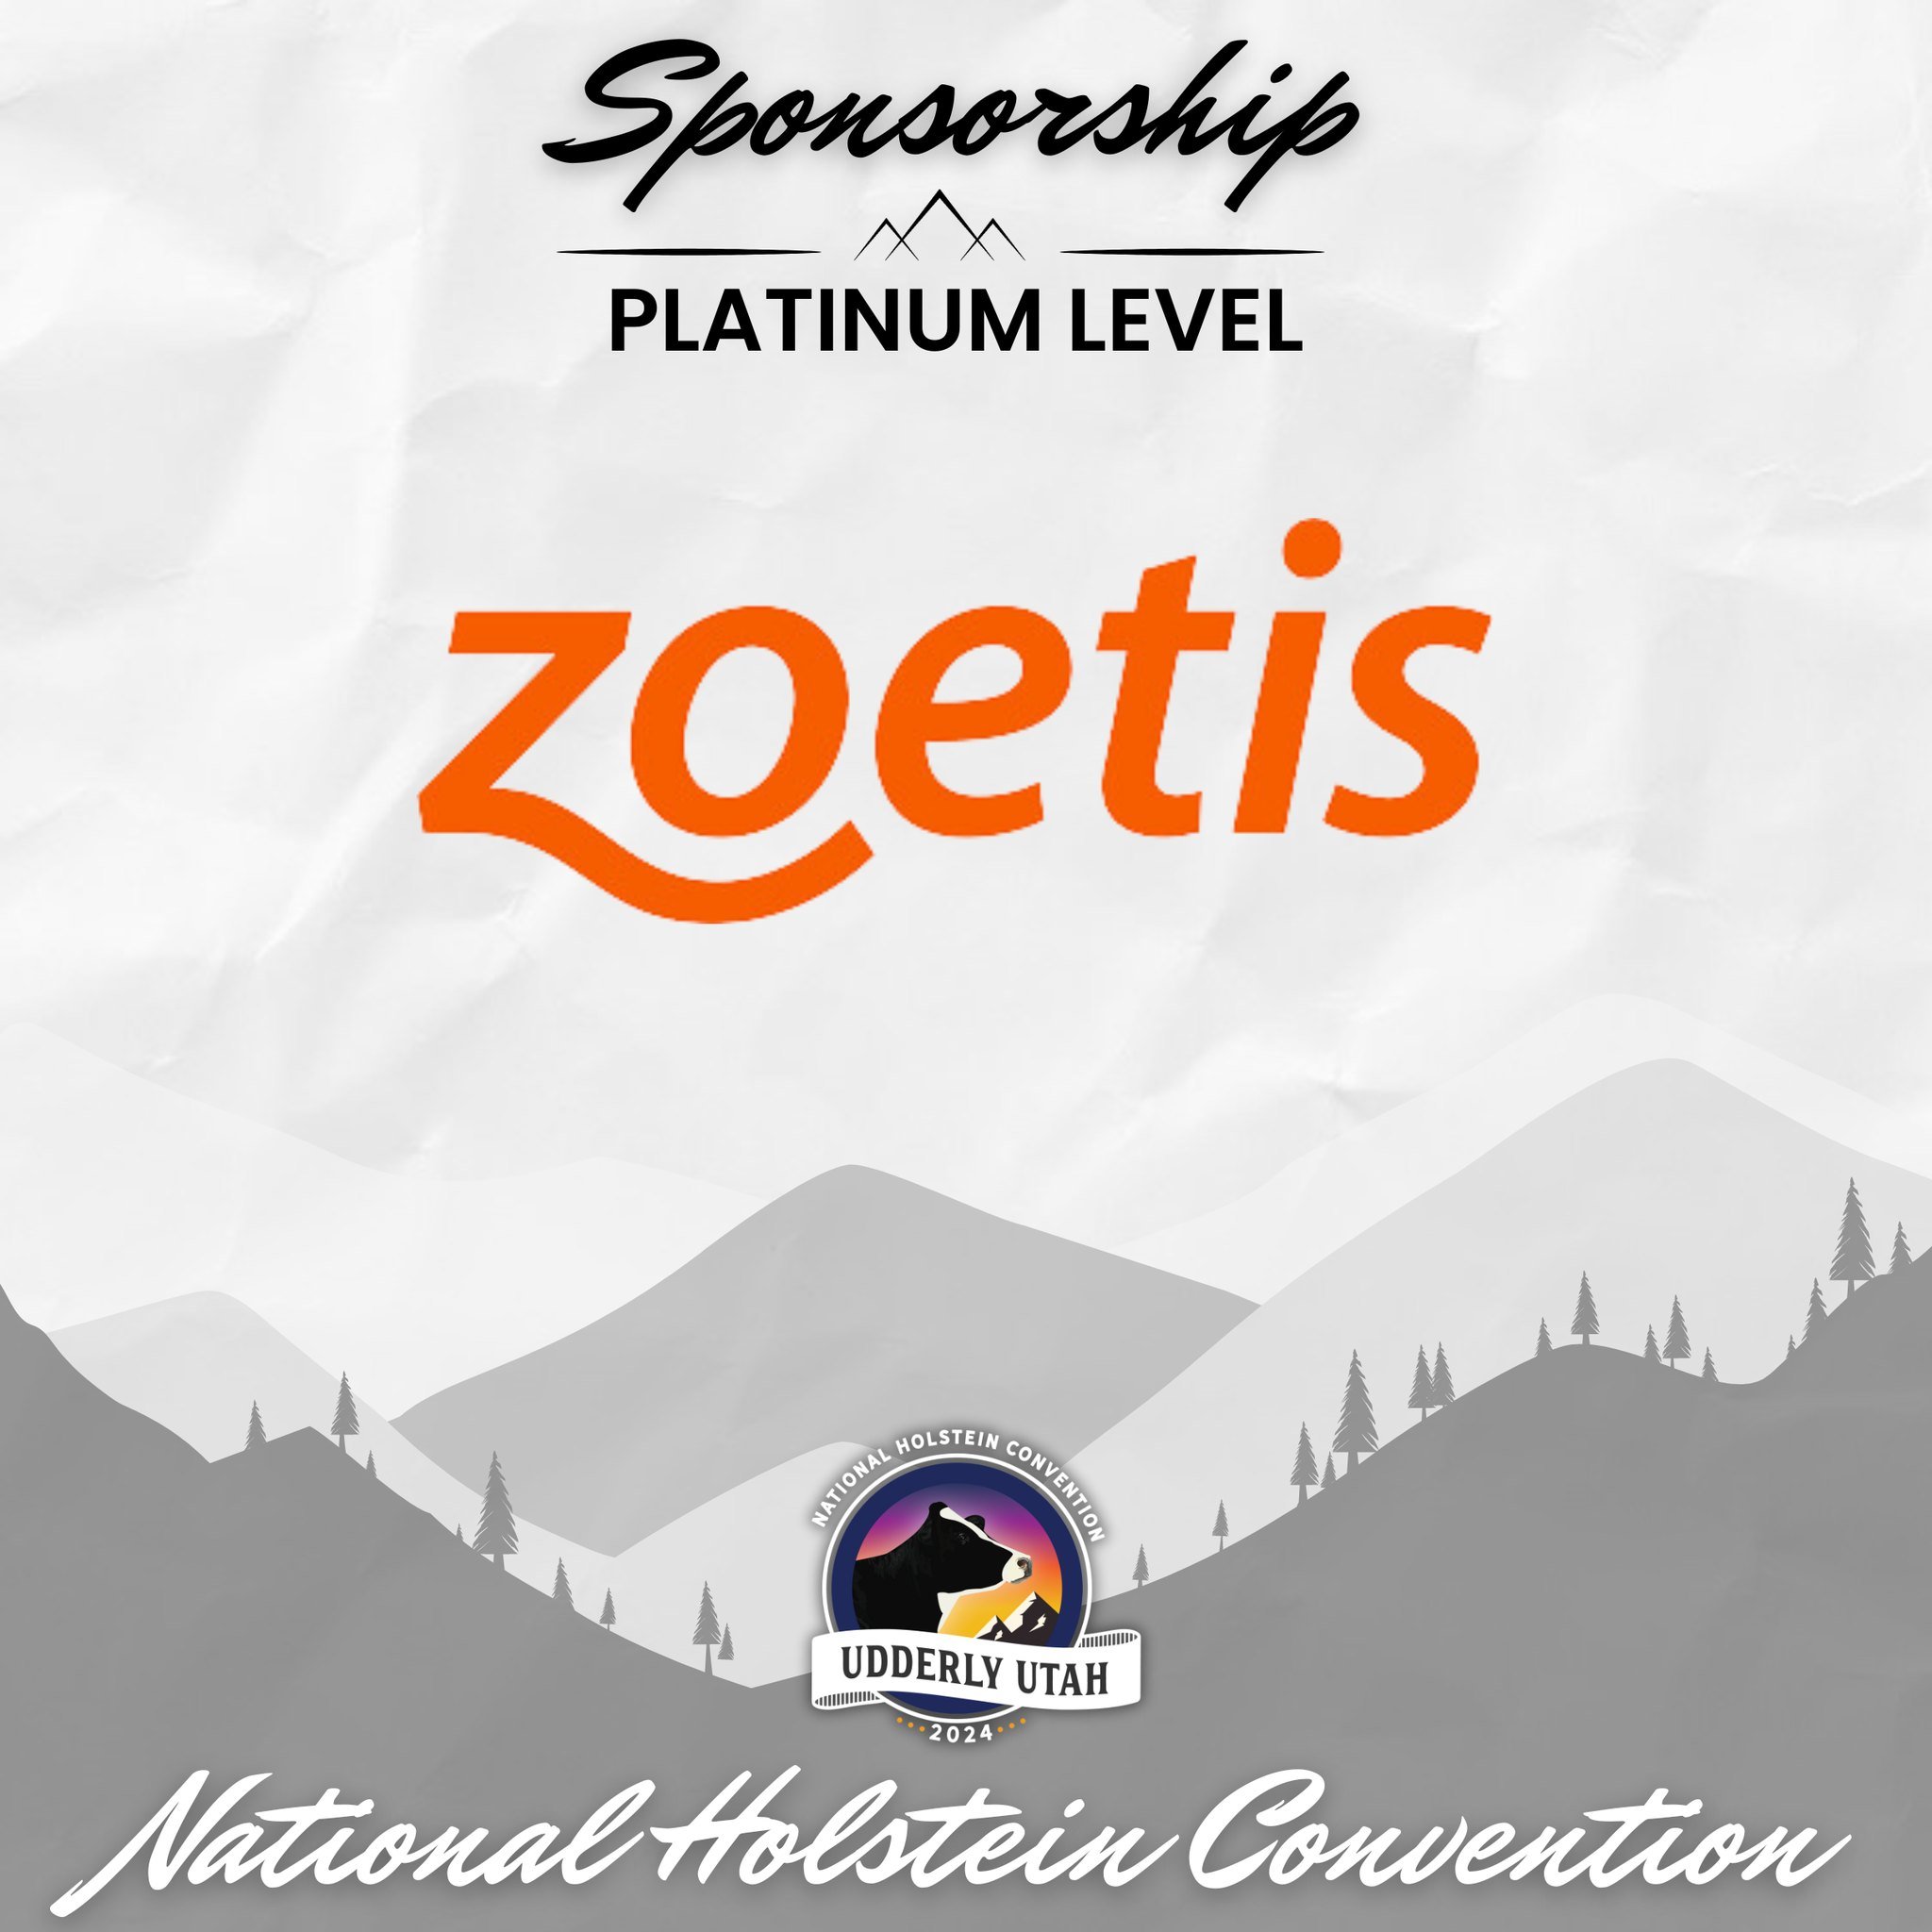 Next on our sponsorship spotlight is @zoetiscattle! 

Thank you to Zoetis for their platinum-level sponsorship! Your unwavering support for the Holstein community is incredibly valued. We couldn't do it without you! 🐄⛰️

Discover all of our fantasti